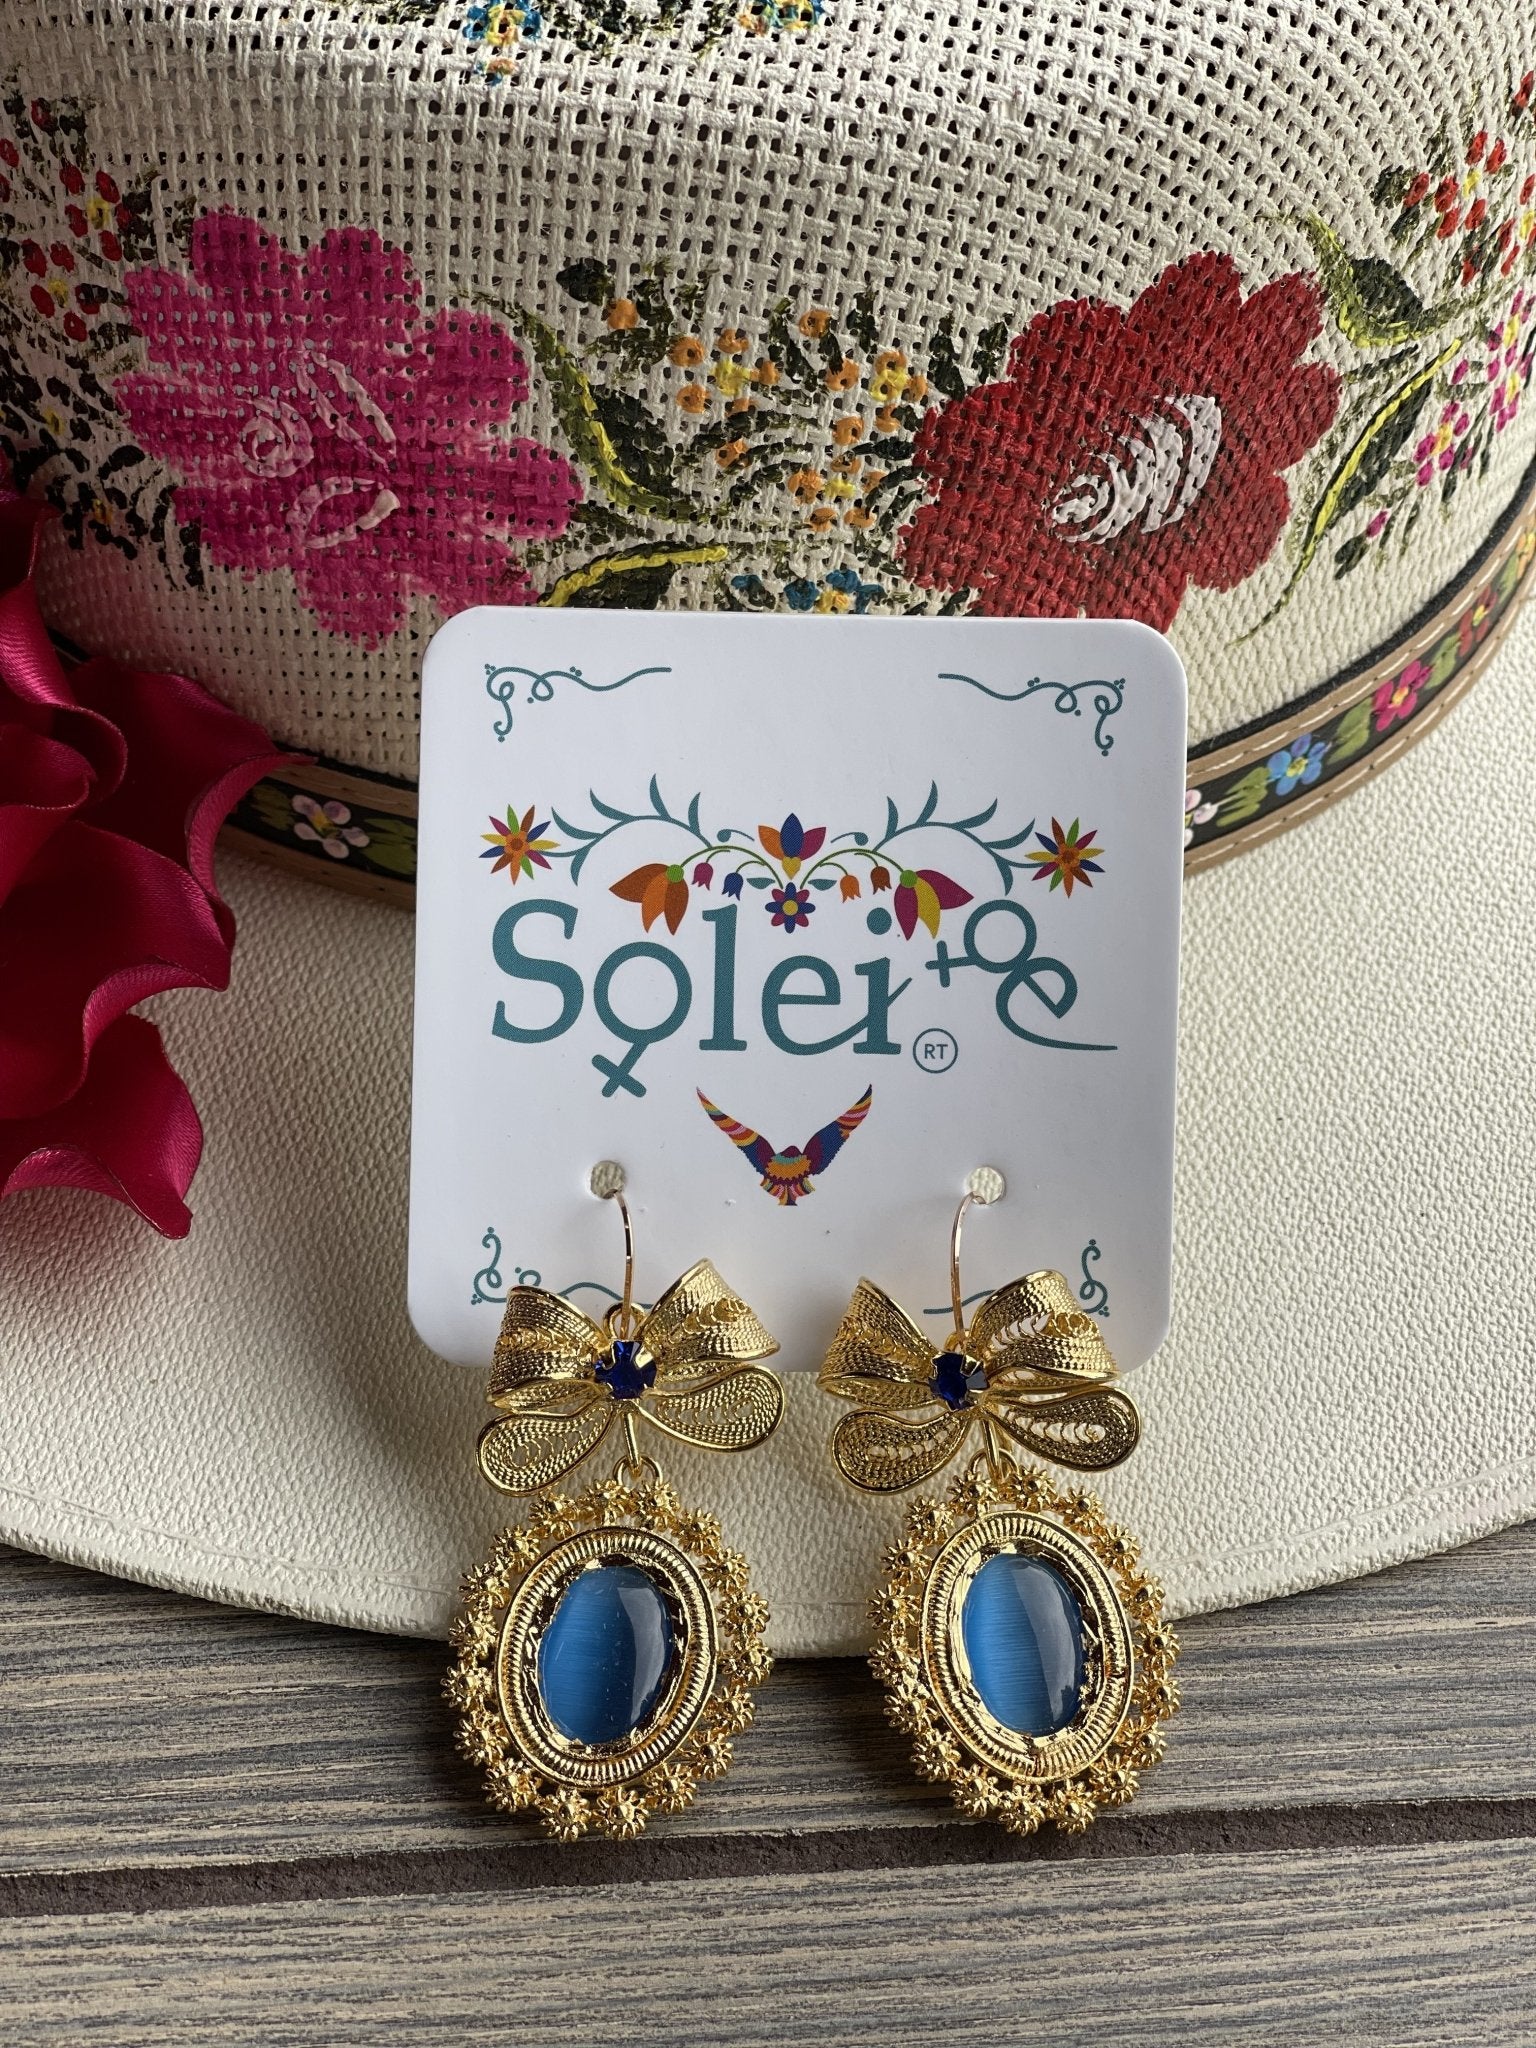 Mexican Filigree Earrings with Stones - Solei Store